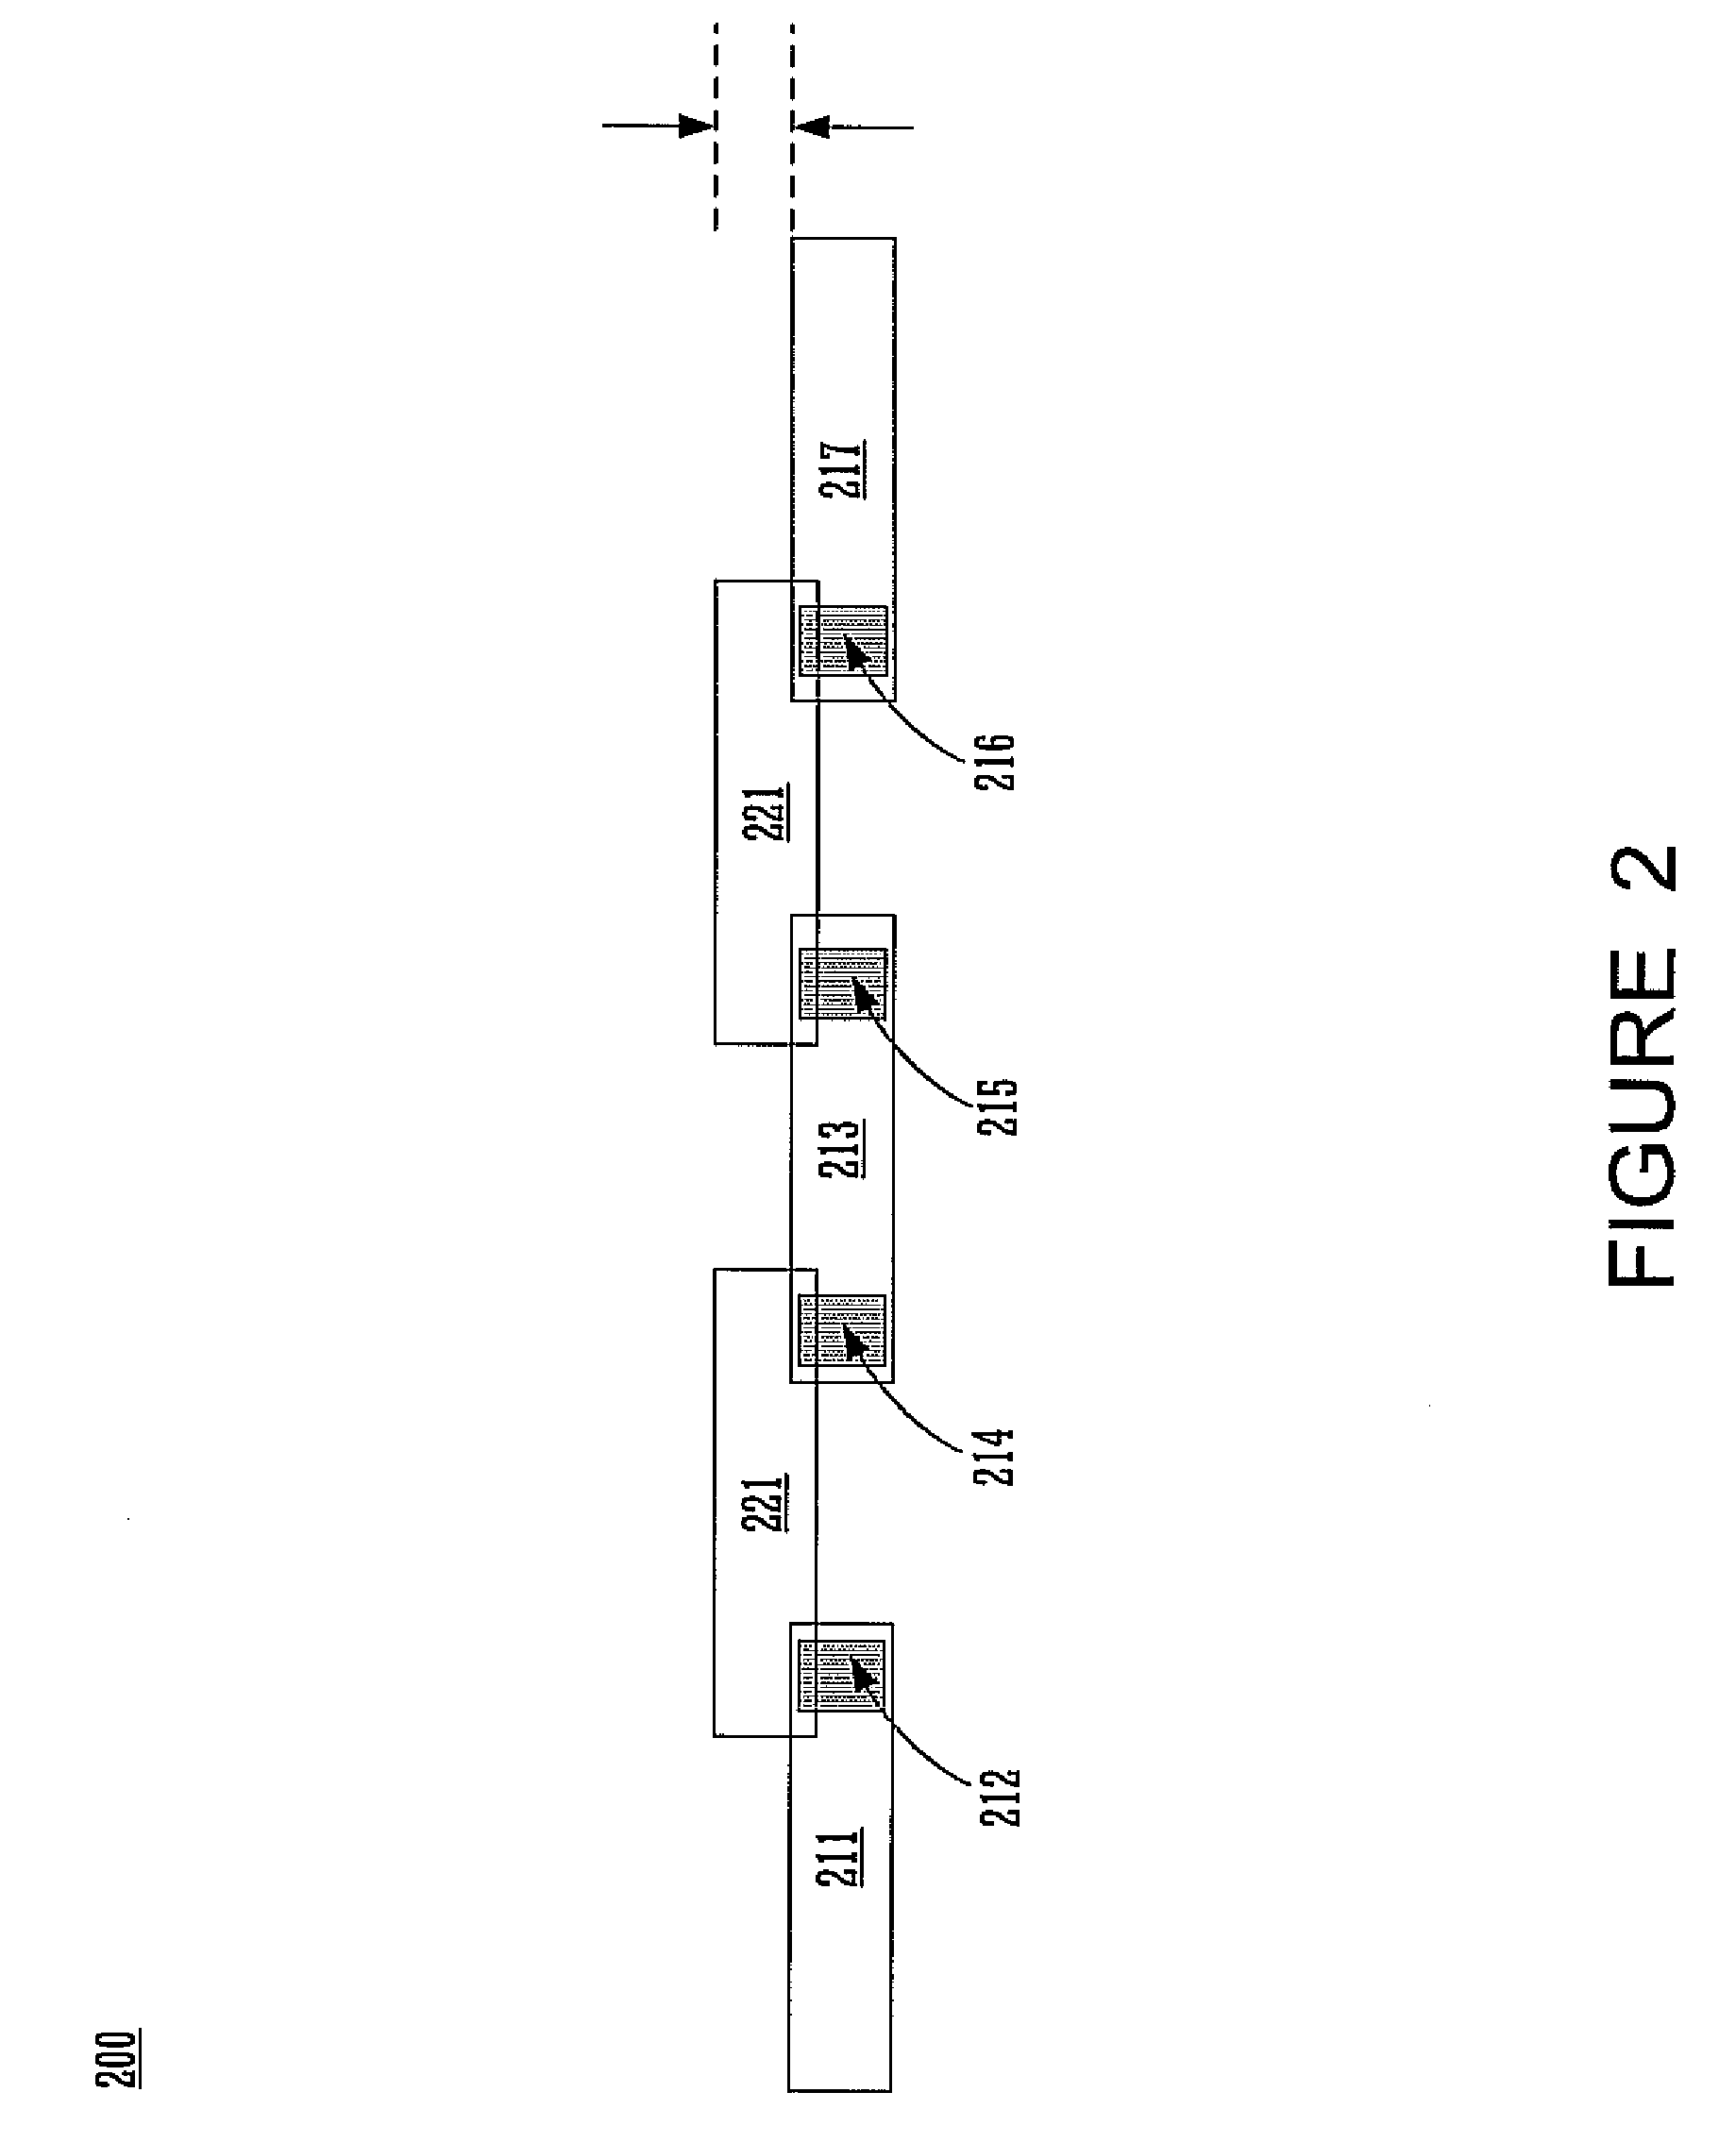 Systems and methods for electrical characterization of inter-layer alignment